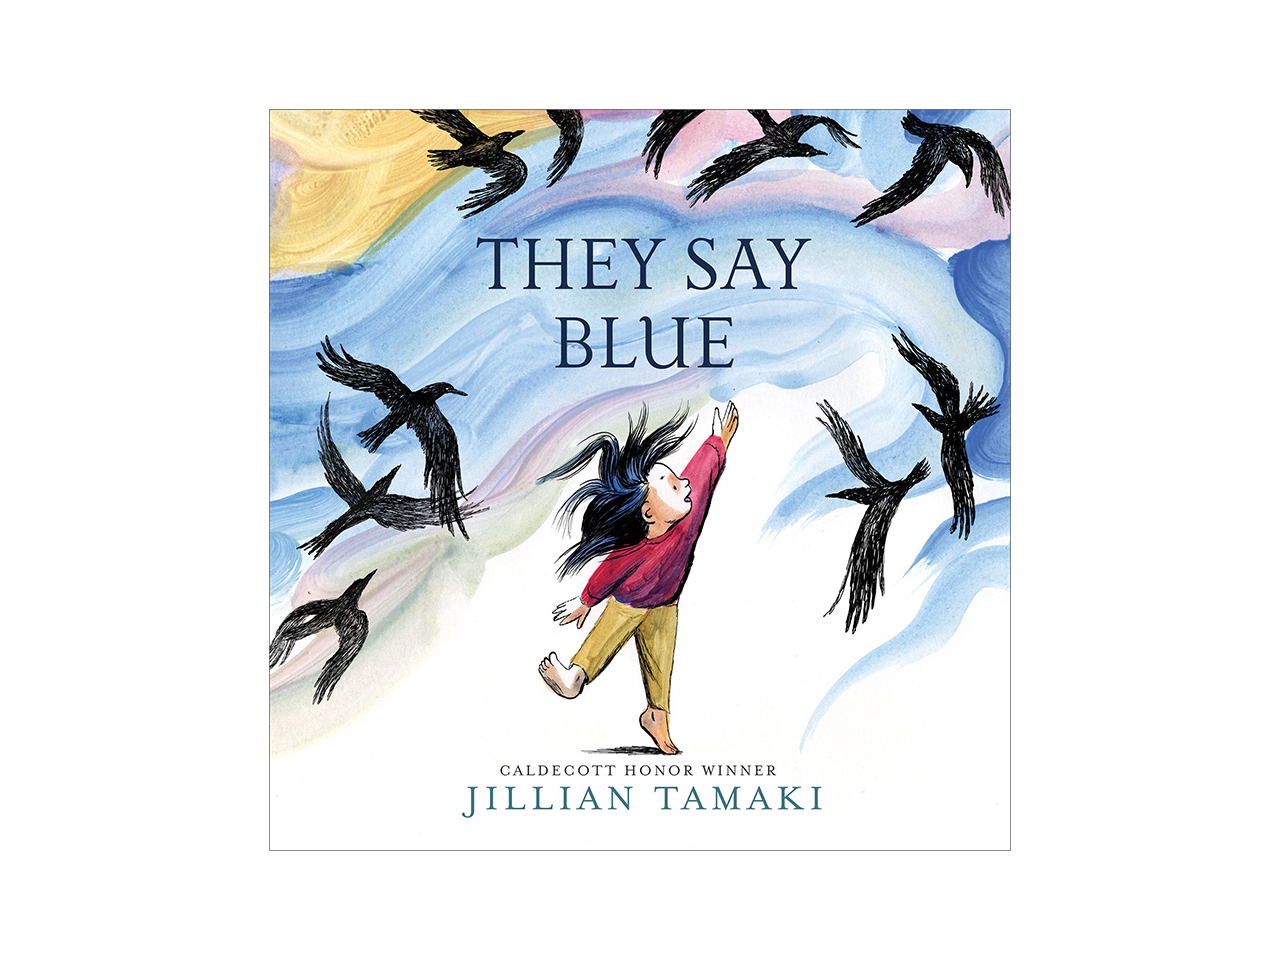 Cover art for TheySay Blue showing an illustrated girl playing in the wind with a bunch of crows